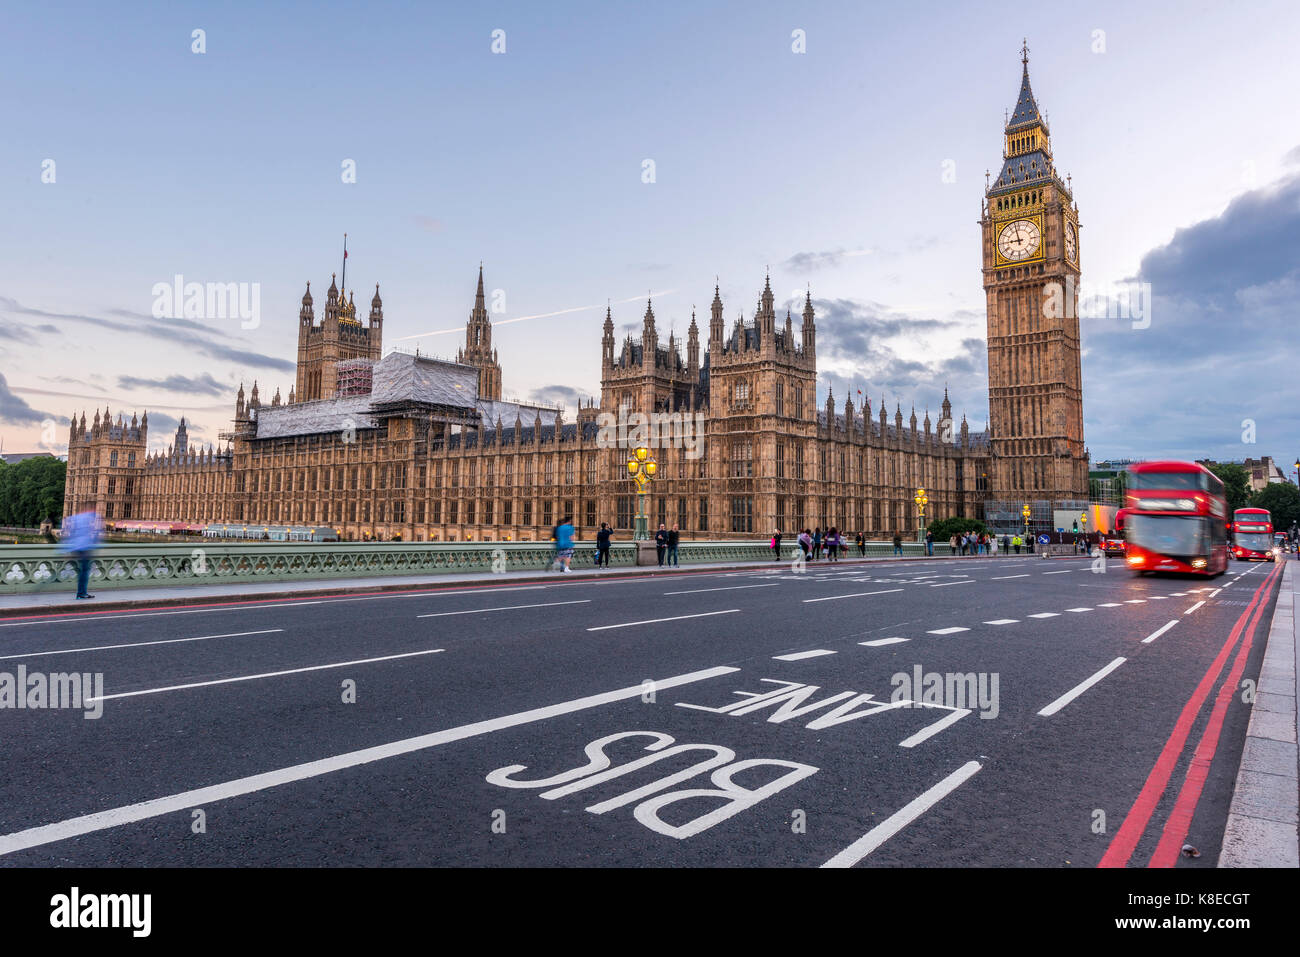 Double decker bus on Westminster Bridge, Westminster Palace, Houses of Parliament, Big Ben, City of Westminster, London, England Stock Photo